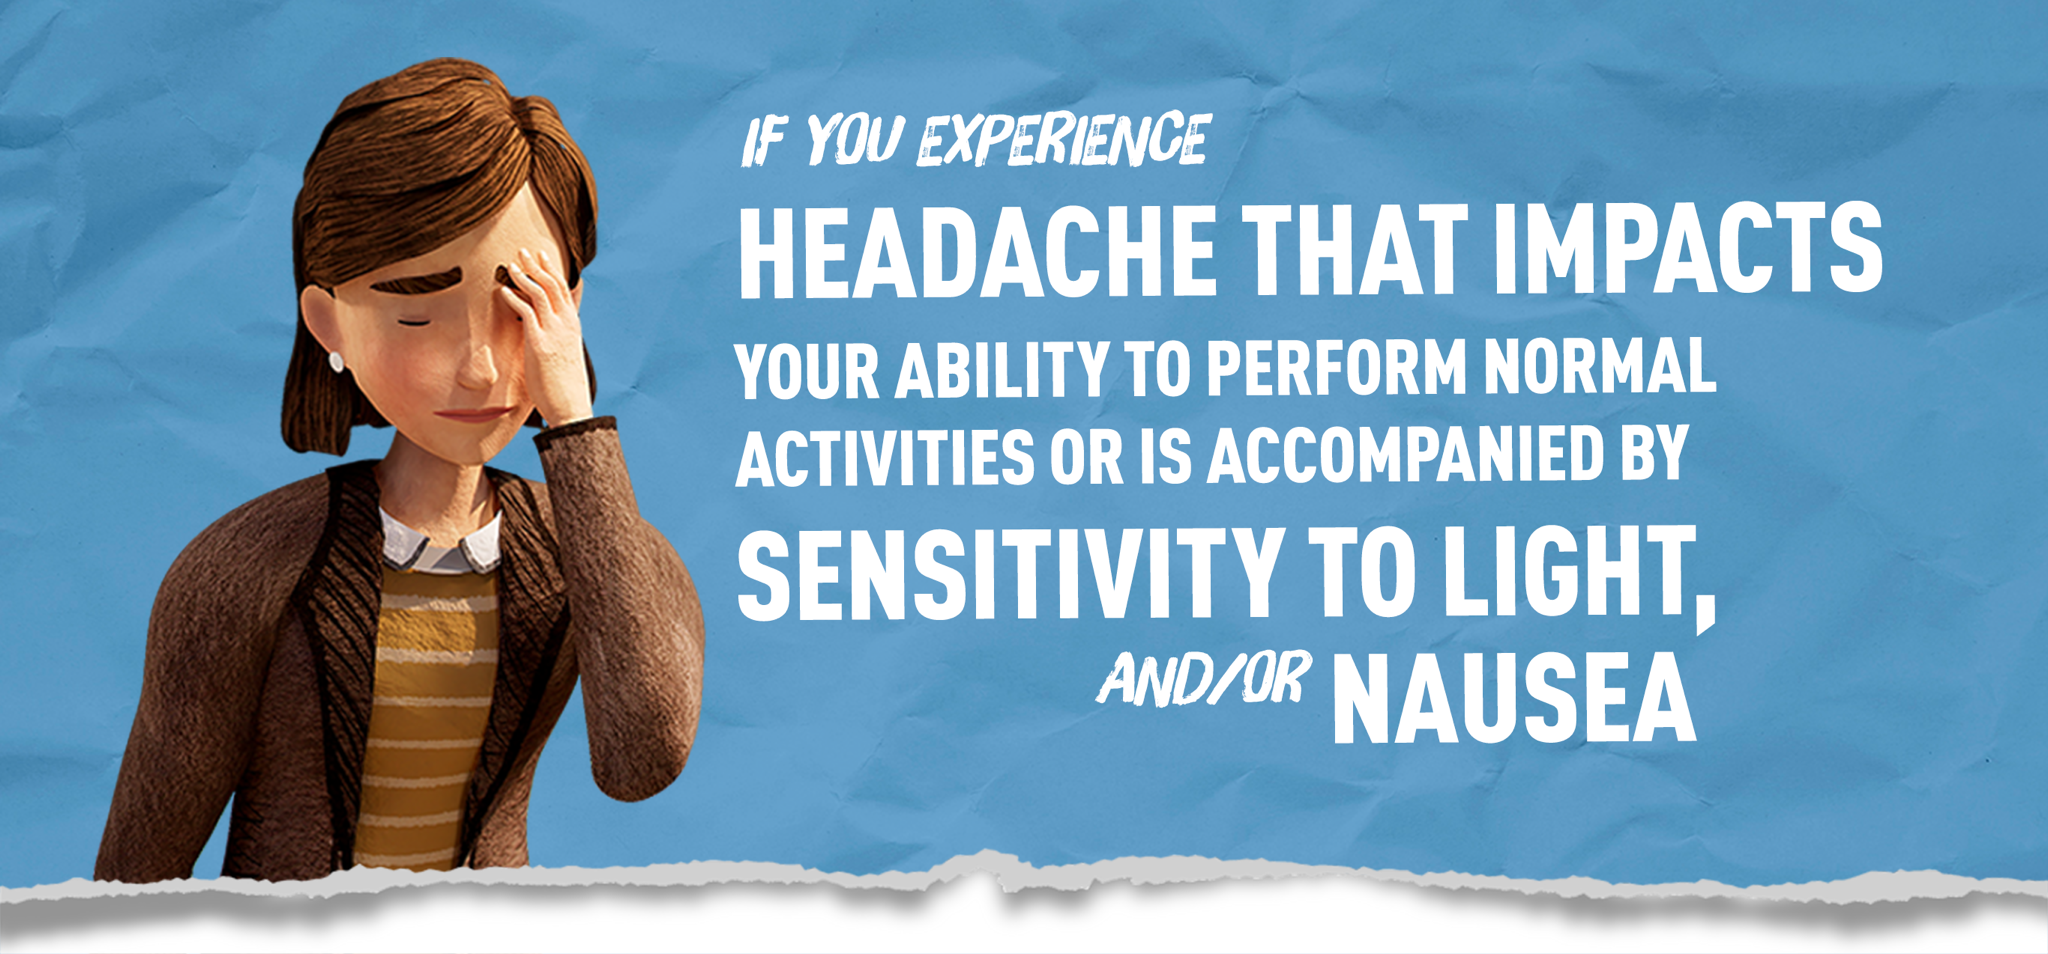 If you experience headache that impacts ability to perform normal activities or is accompanied by light sensitivity or nausea